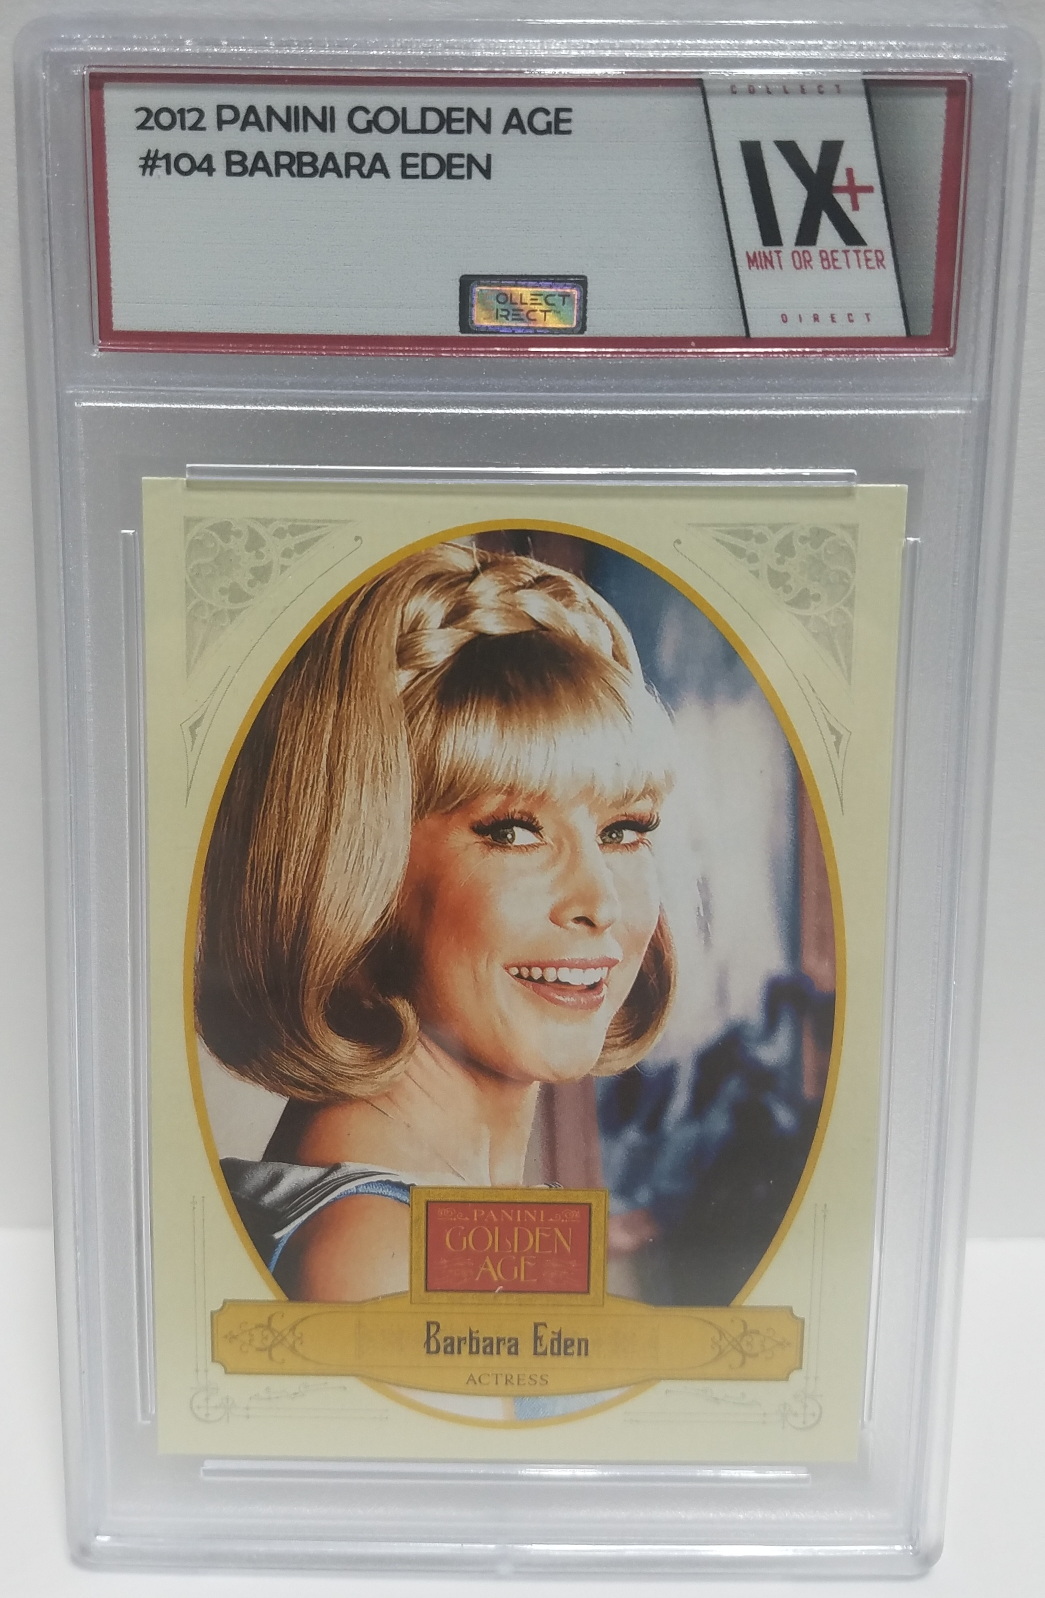 BARBARA EDEN 2012 Panini Golden Age #104 Collect Direct Graded Mint or Better Actress I Dream of Jeannie